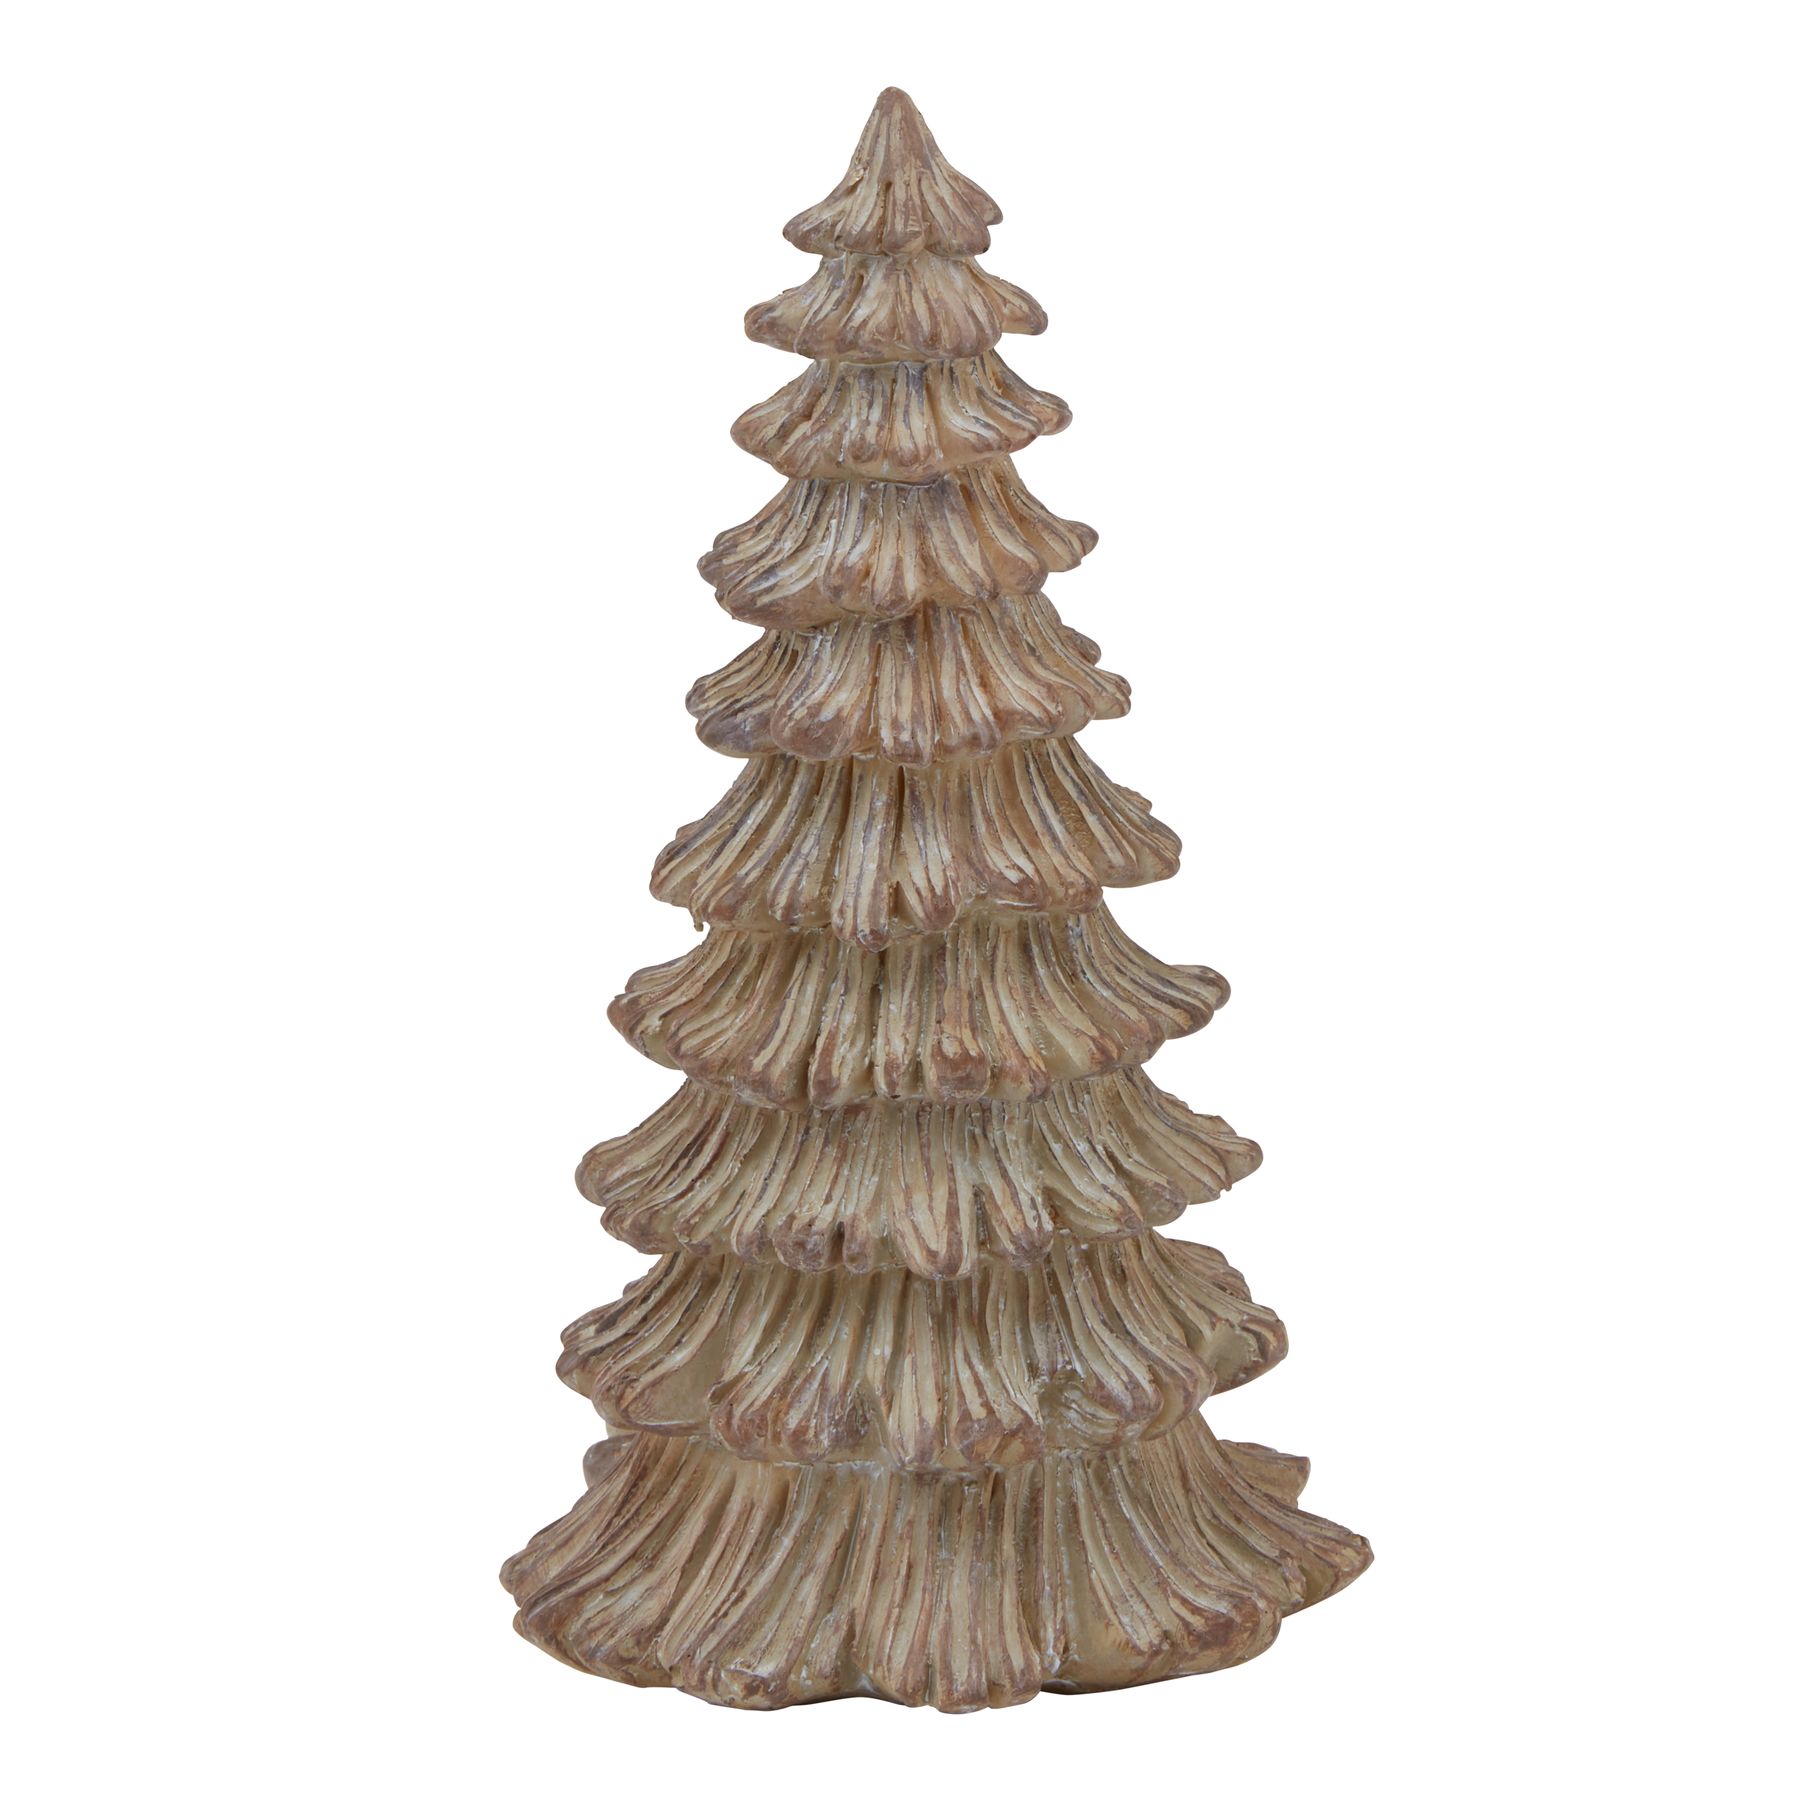 Small Pine Tree Sculpture - Image 1